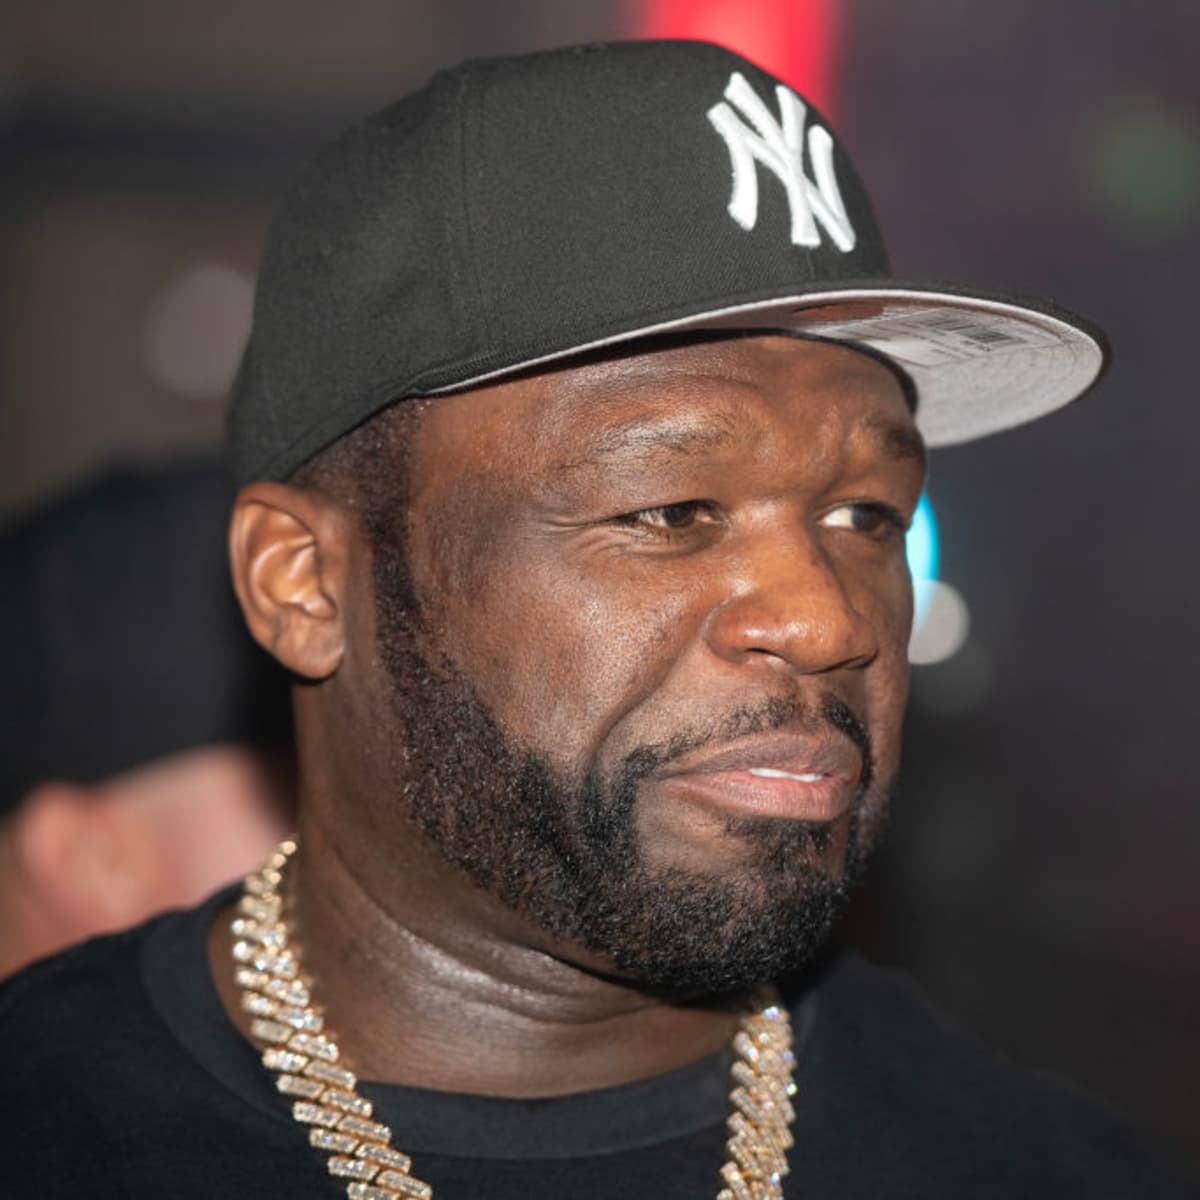 50 Cent Injures Power 106 FM DJ with Microphone Toss During L.A. Show -  LAmag - Culture, Food, Fashion, News & Los Angeles